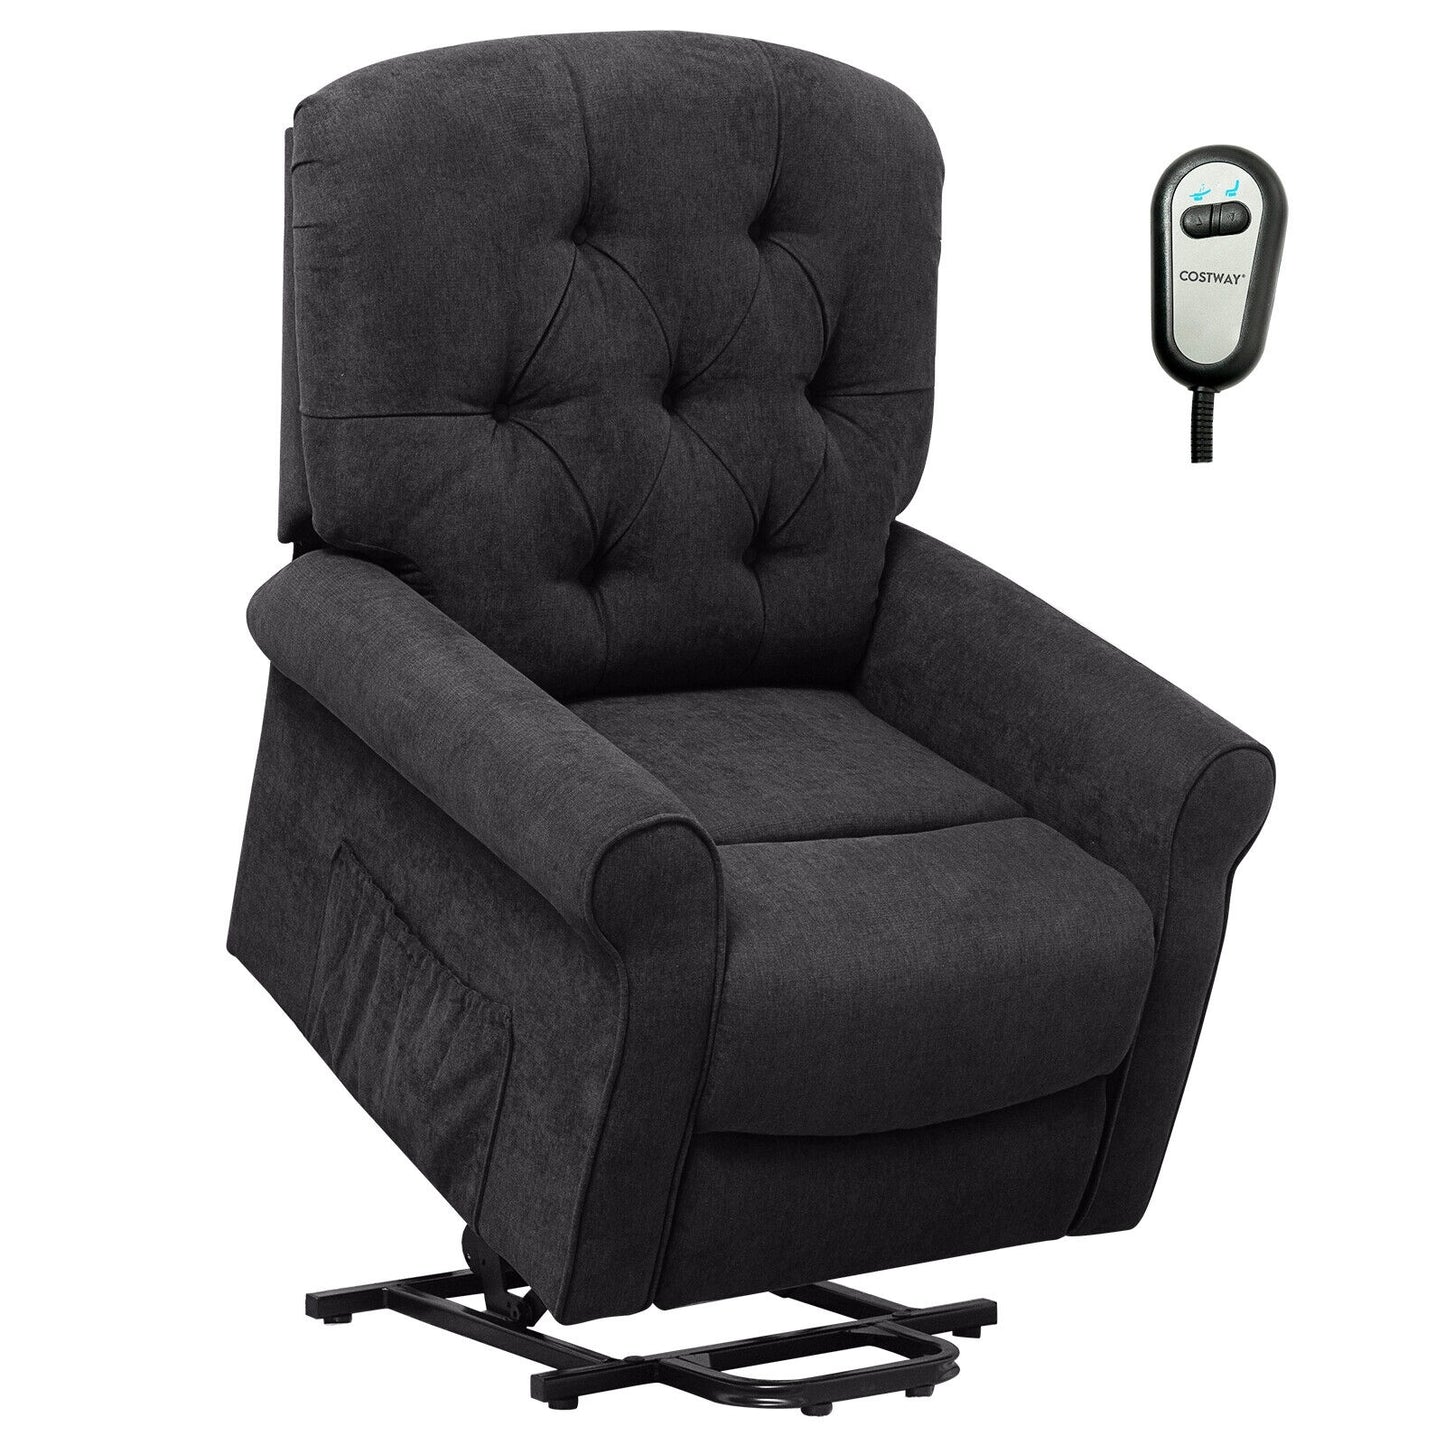 Recliner Chair Sofa for Elderly with Side Pocket and Remote Control-Black